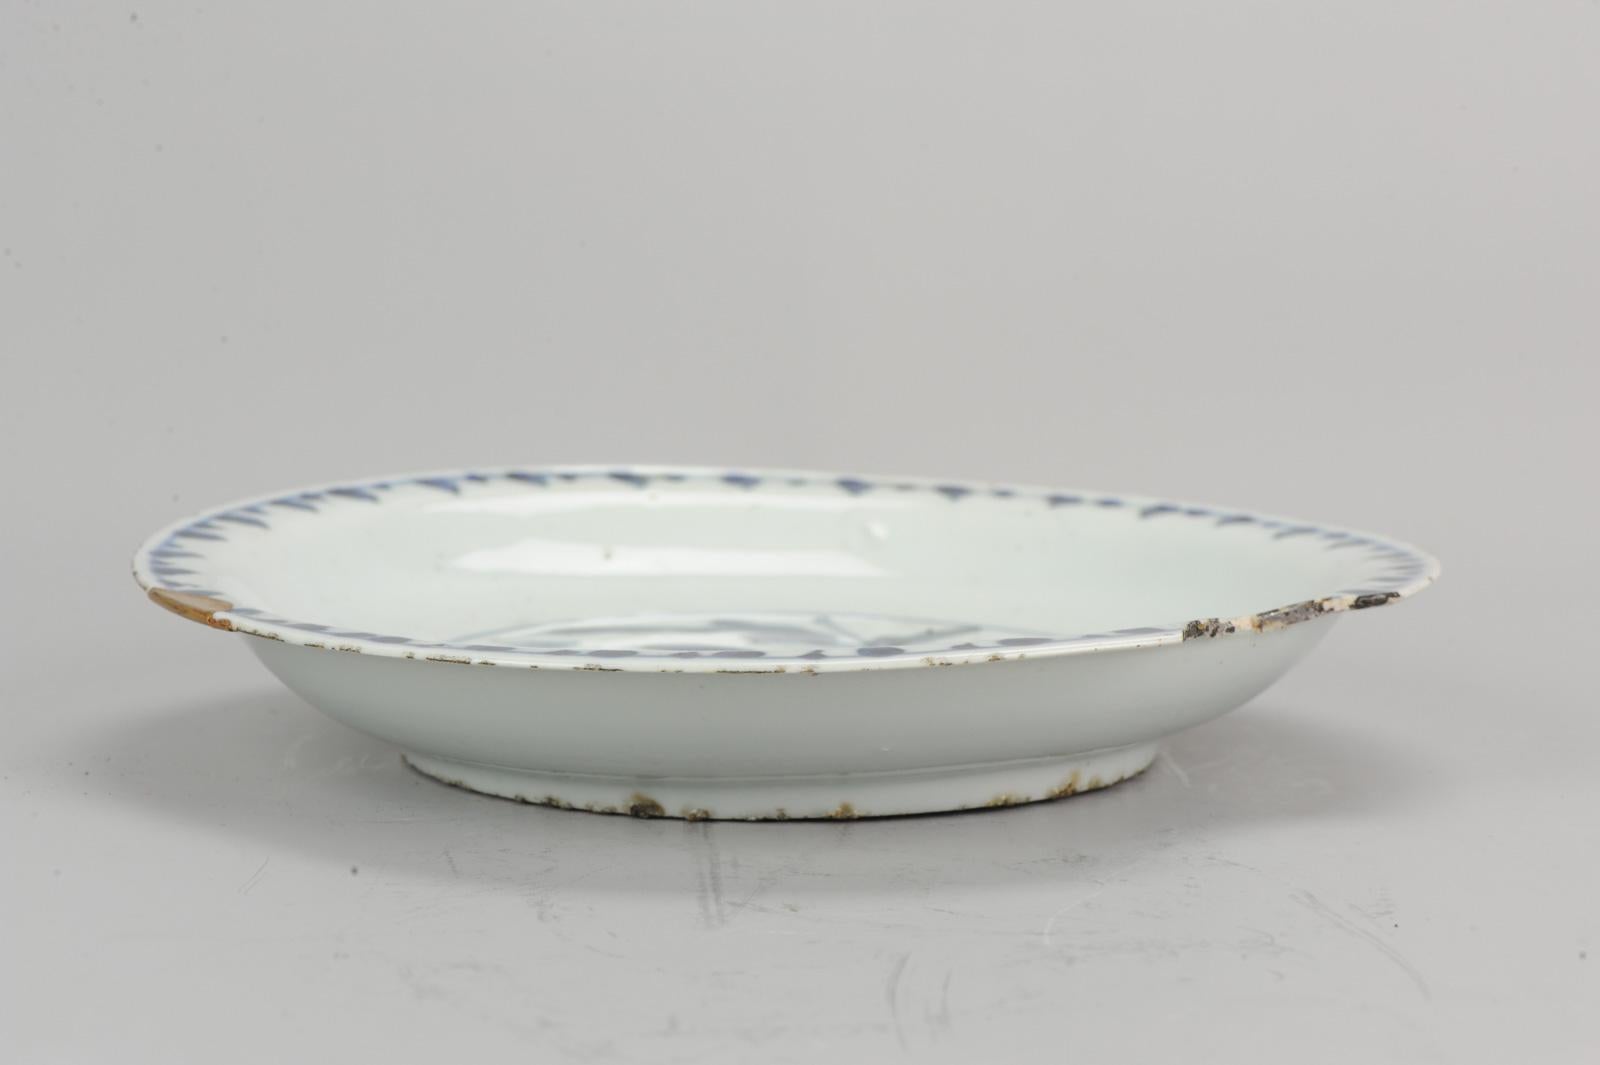 A very nice plate, marked at base. Early 17th century. Rare plate

Additional information:
Material: Porcelain & Pottery
Type: Bowls
Region of Origin: China
Period: 17th century Ming (1368 - 1620) Transitional (1620 - 1661)
Age: Pre-1800
Condition: